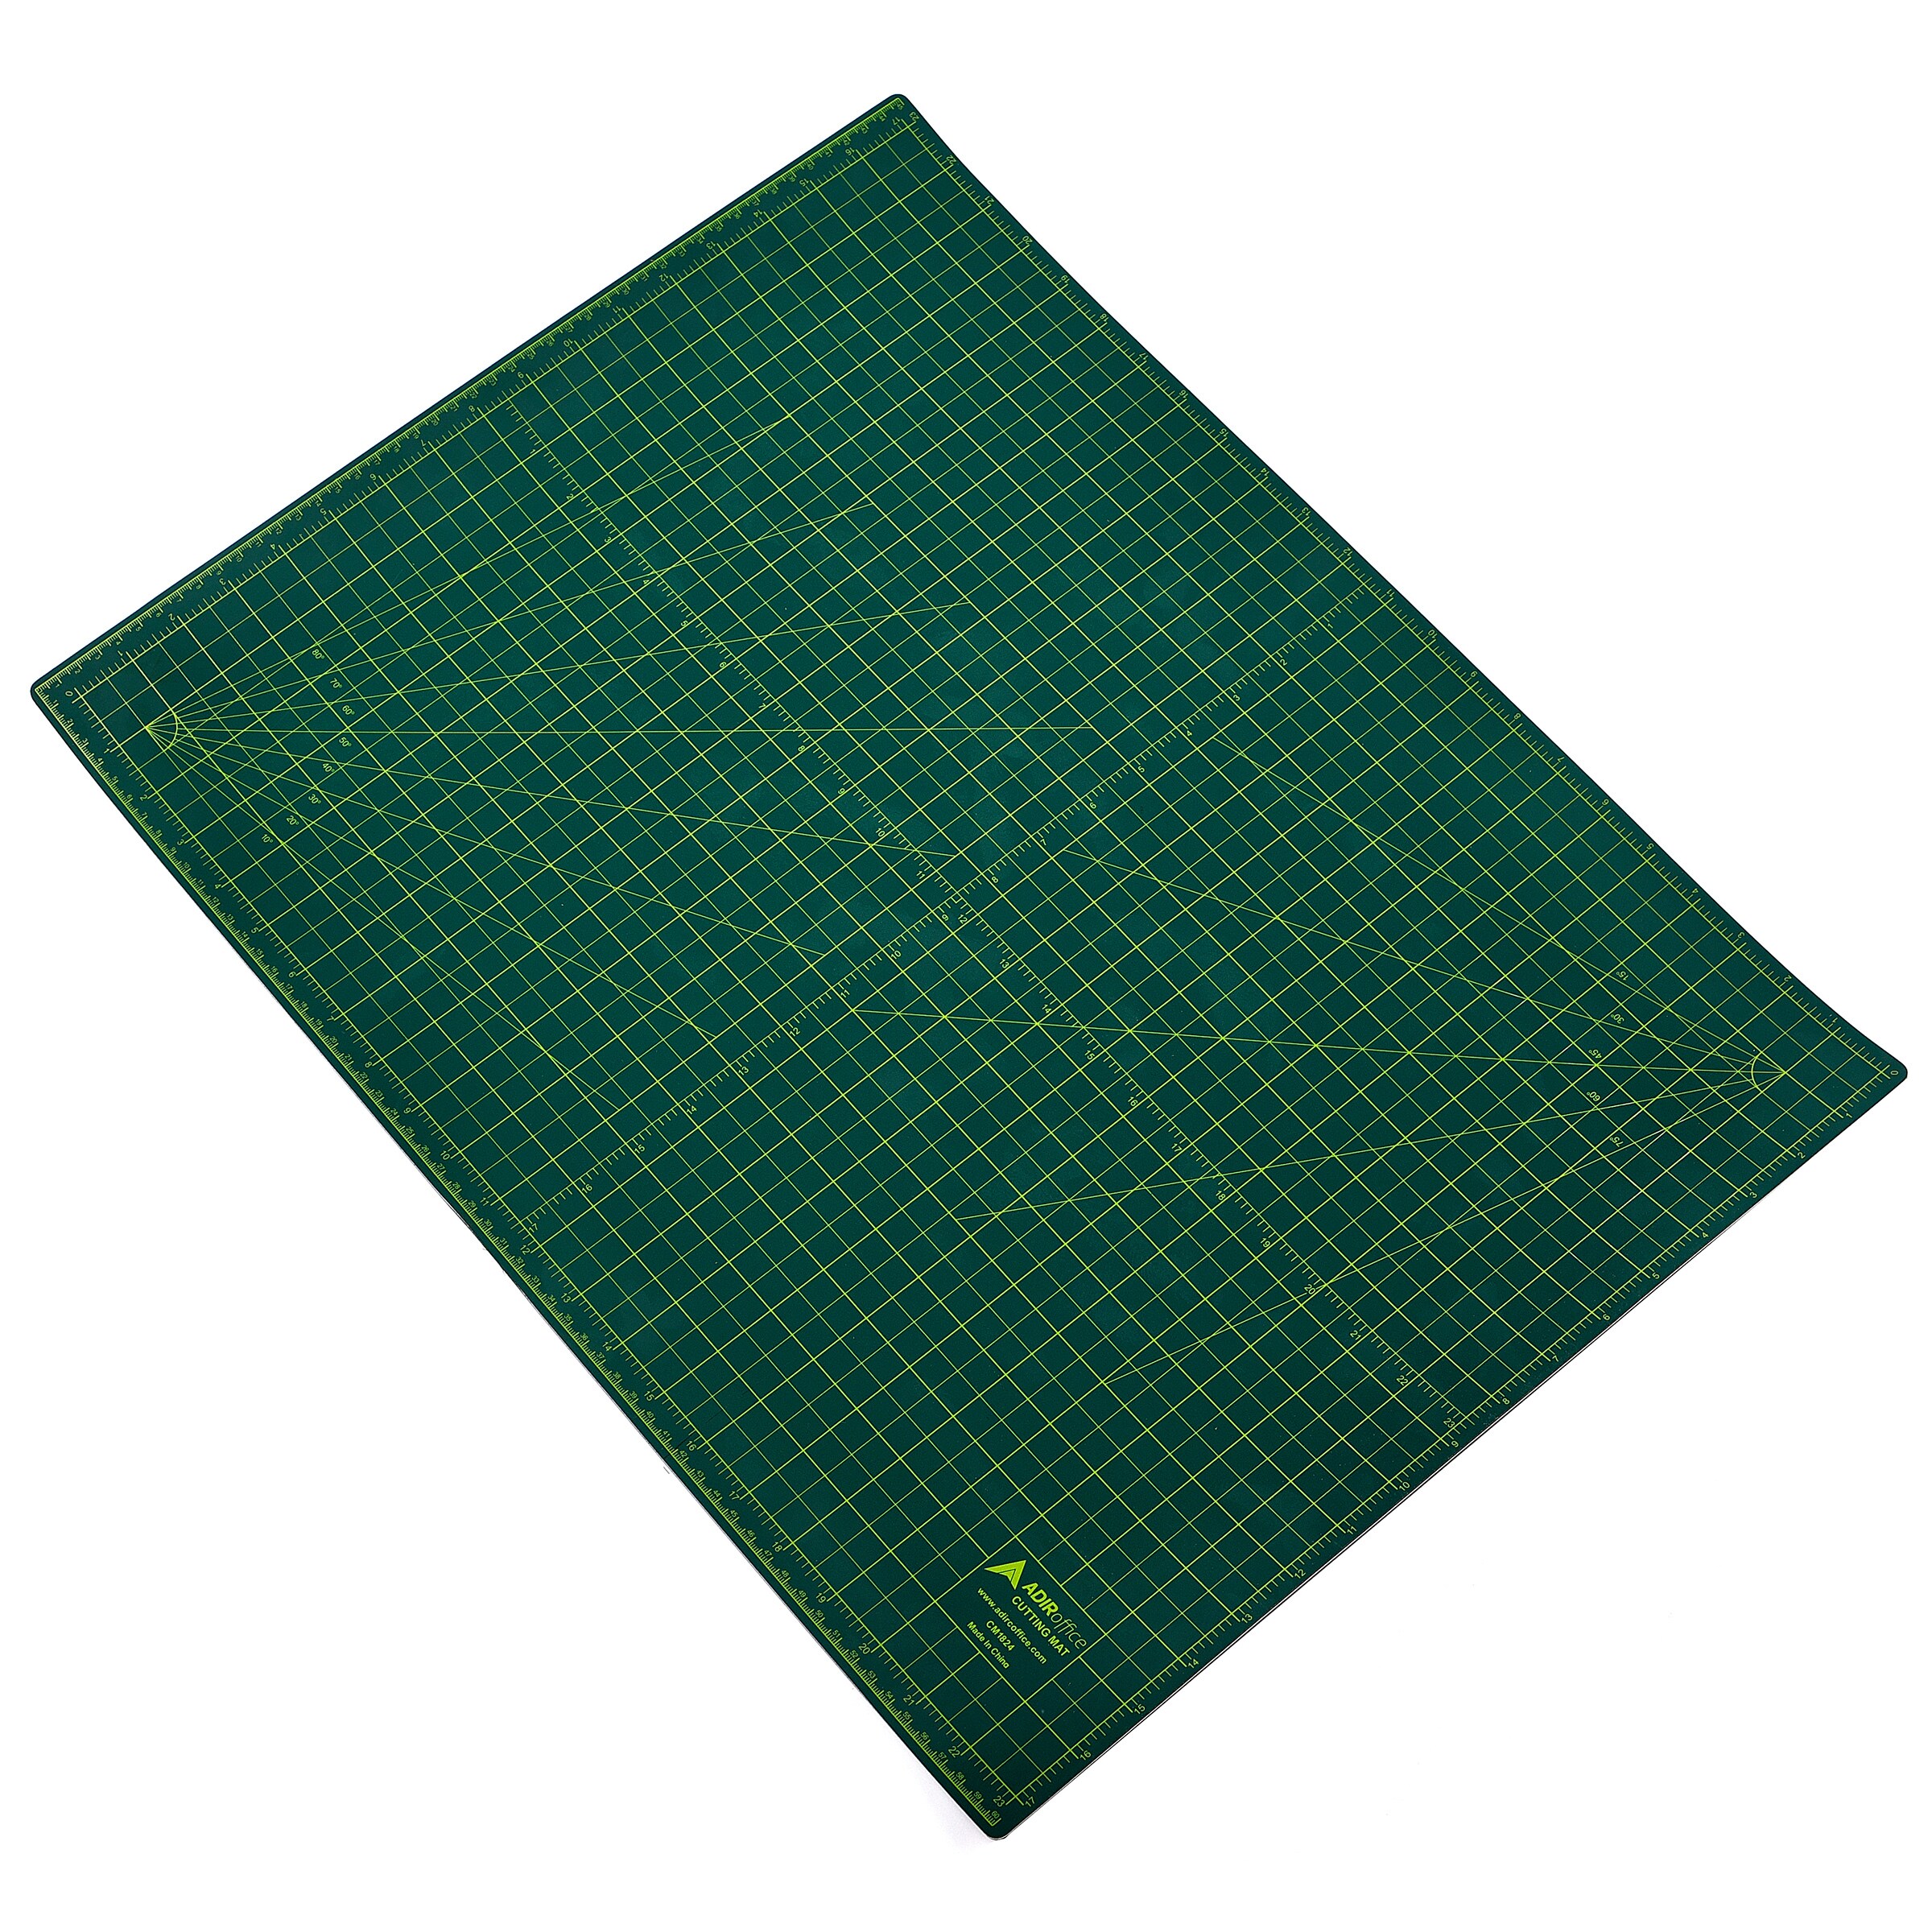 Size A2 18 X 24 Self-healing CUTTING MAT Reversible Inches and